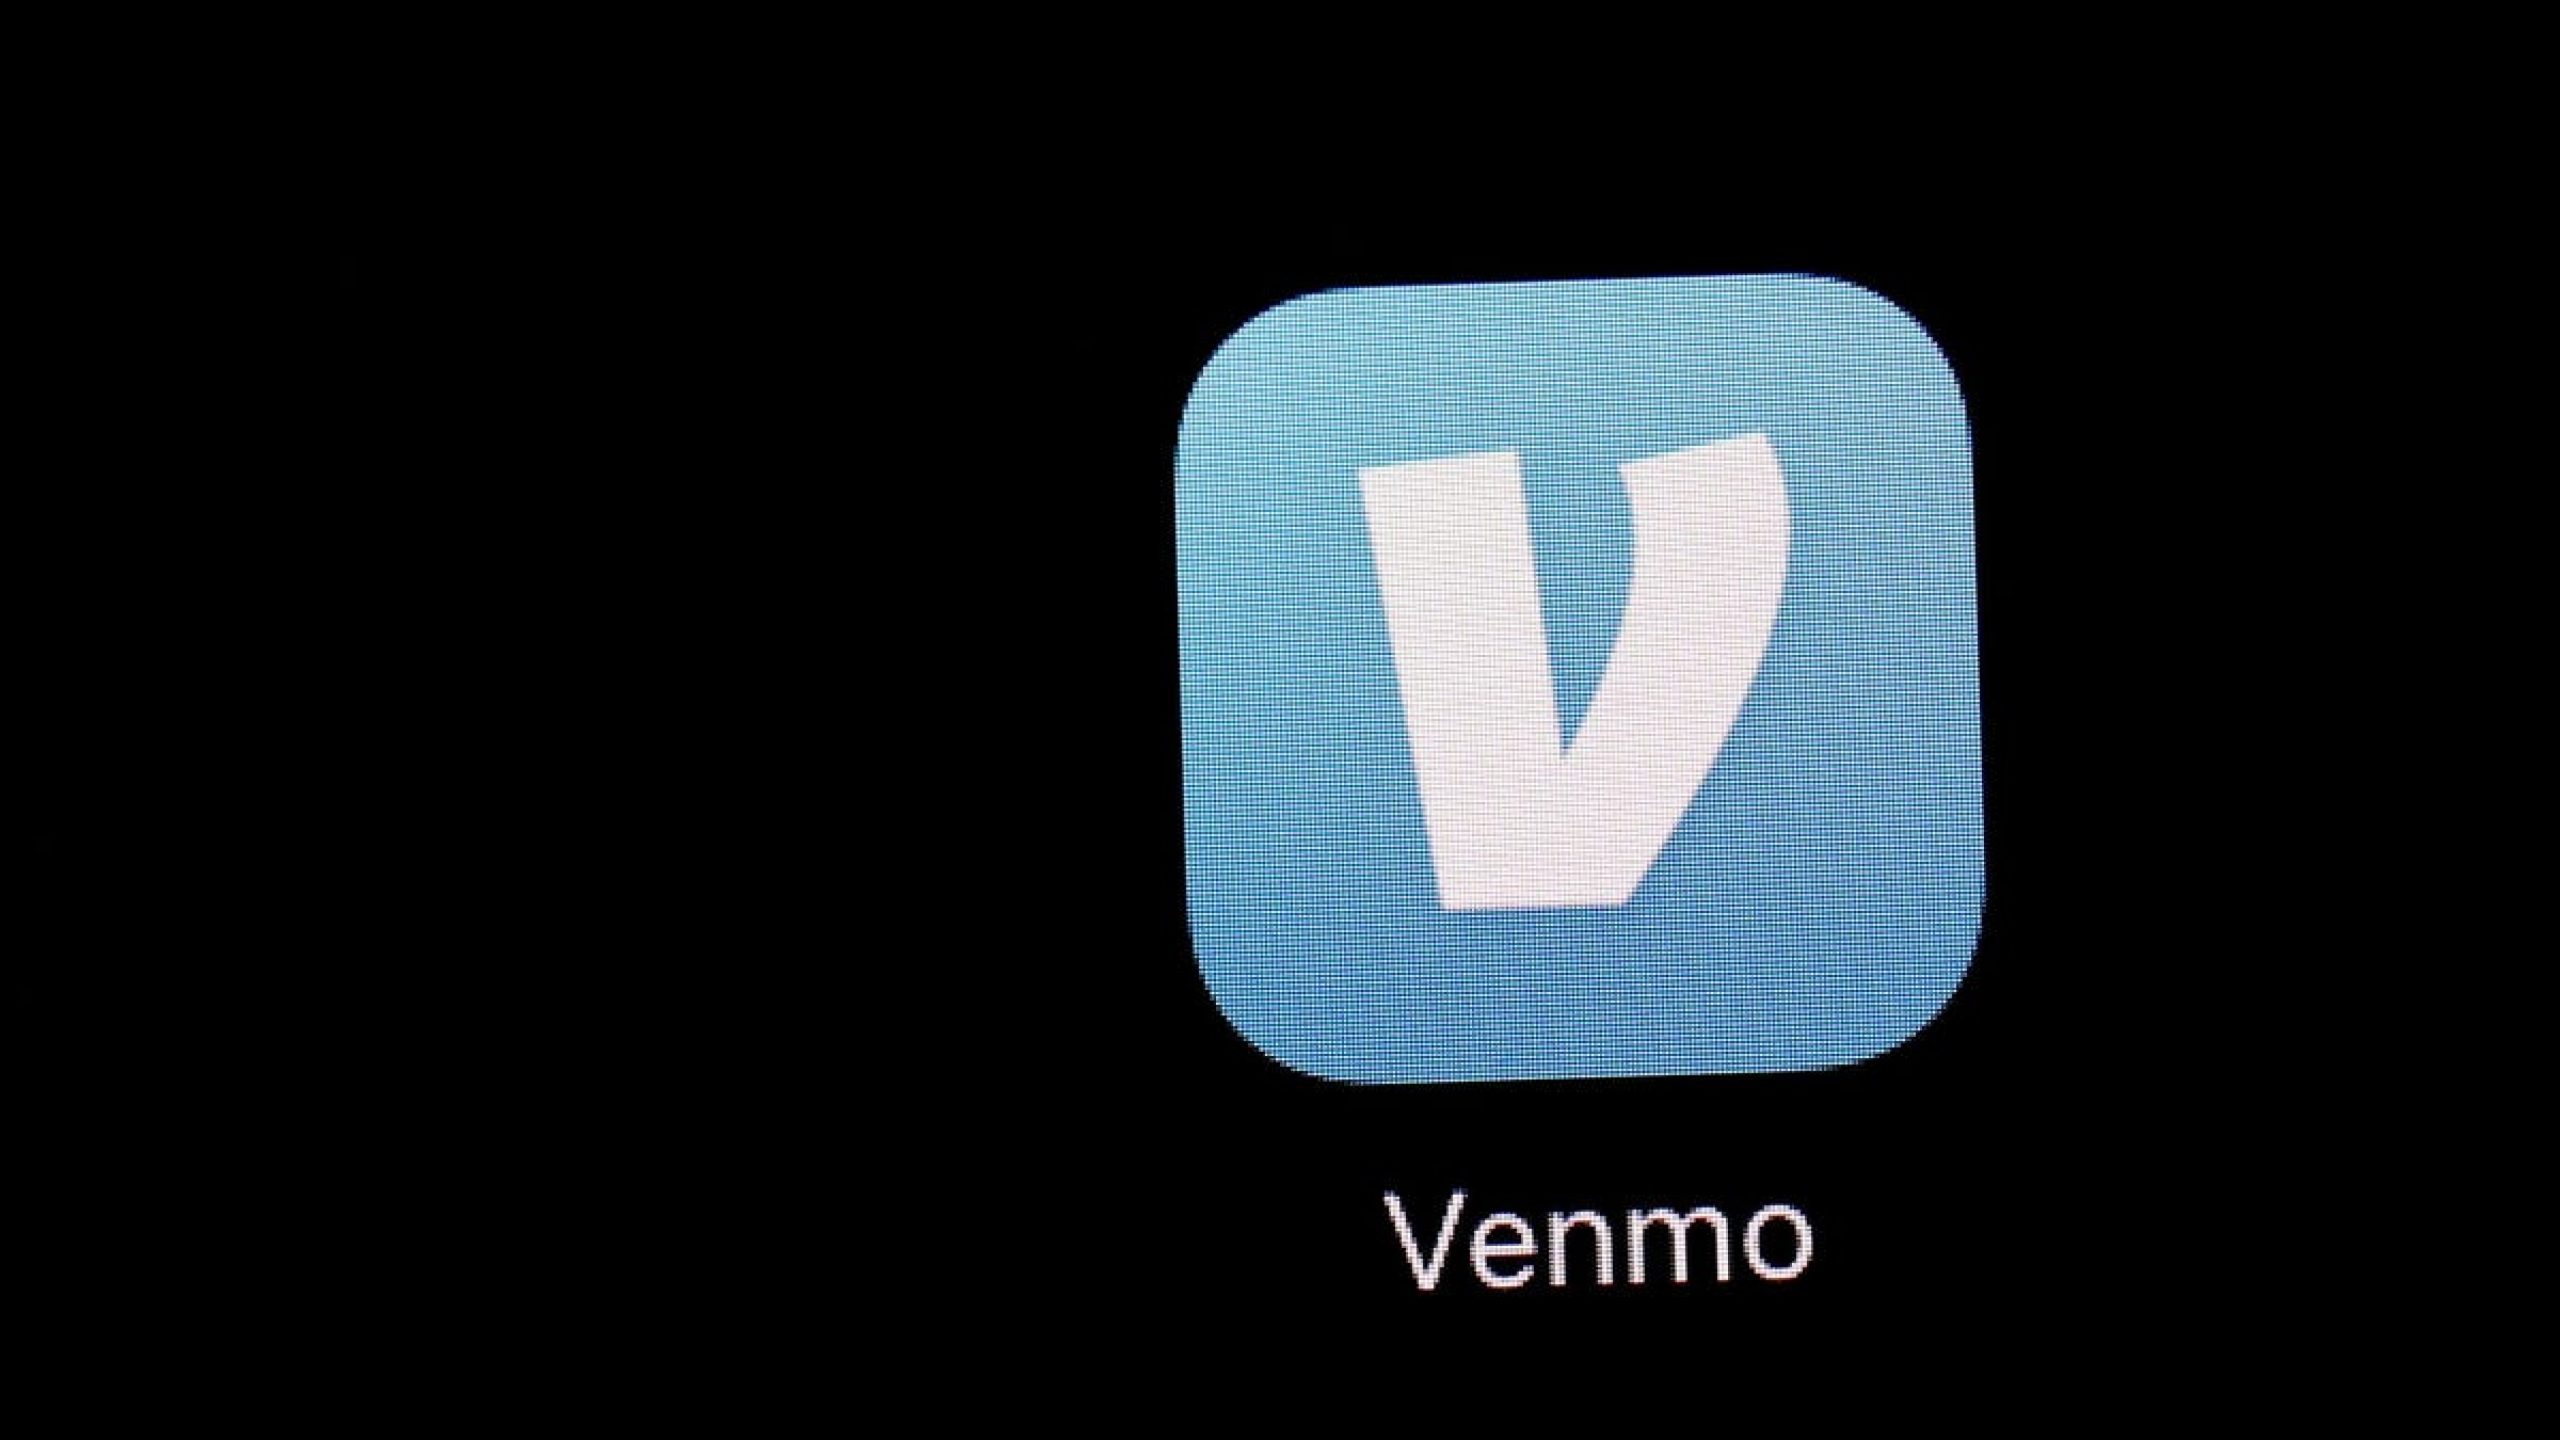 Years Later, Venmo Finally Gives Users the Option to Make Friends List Private